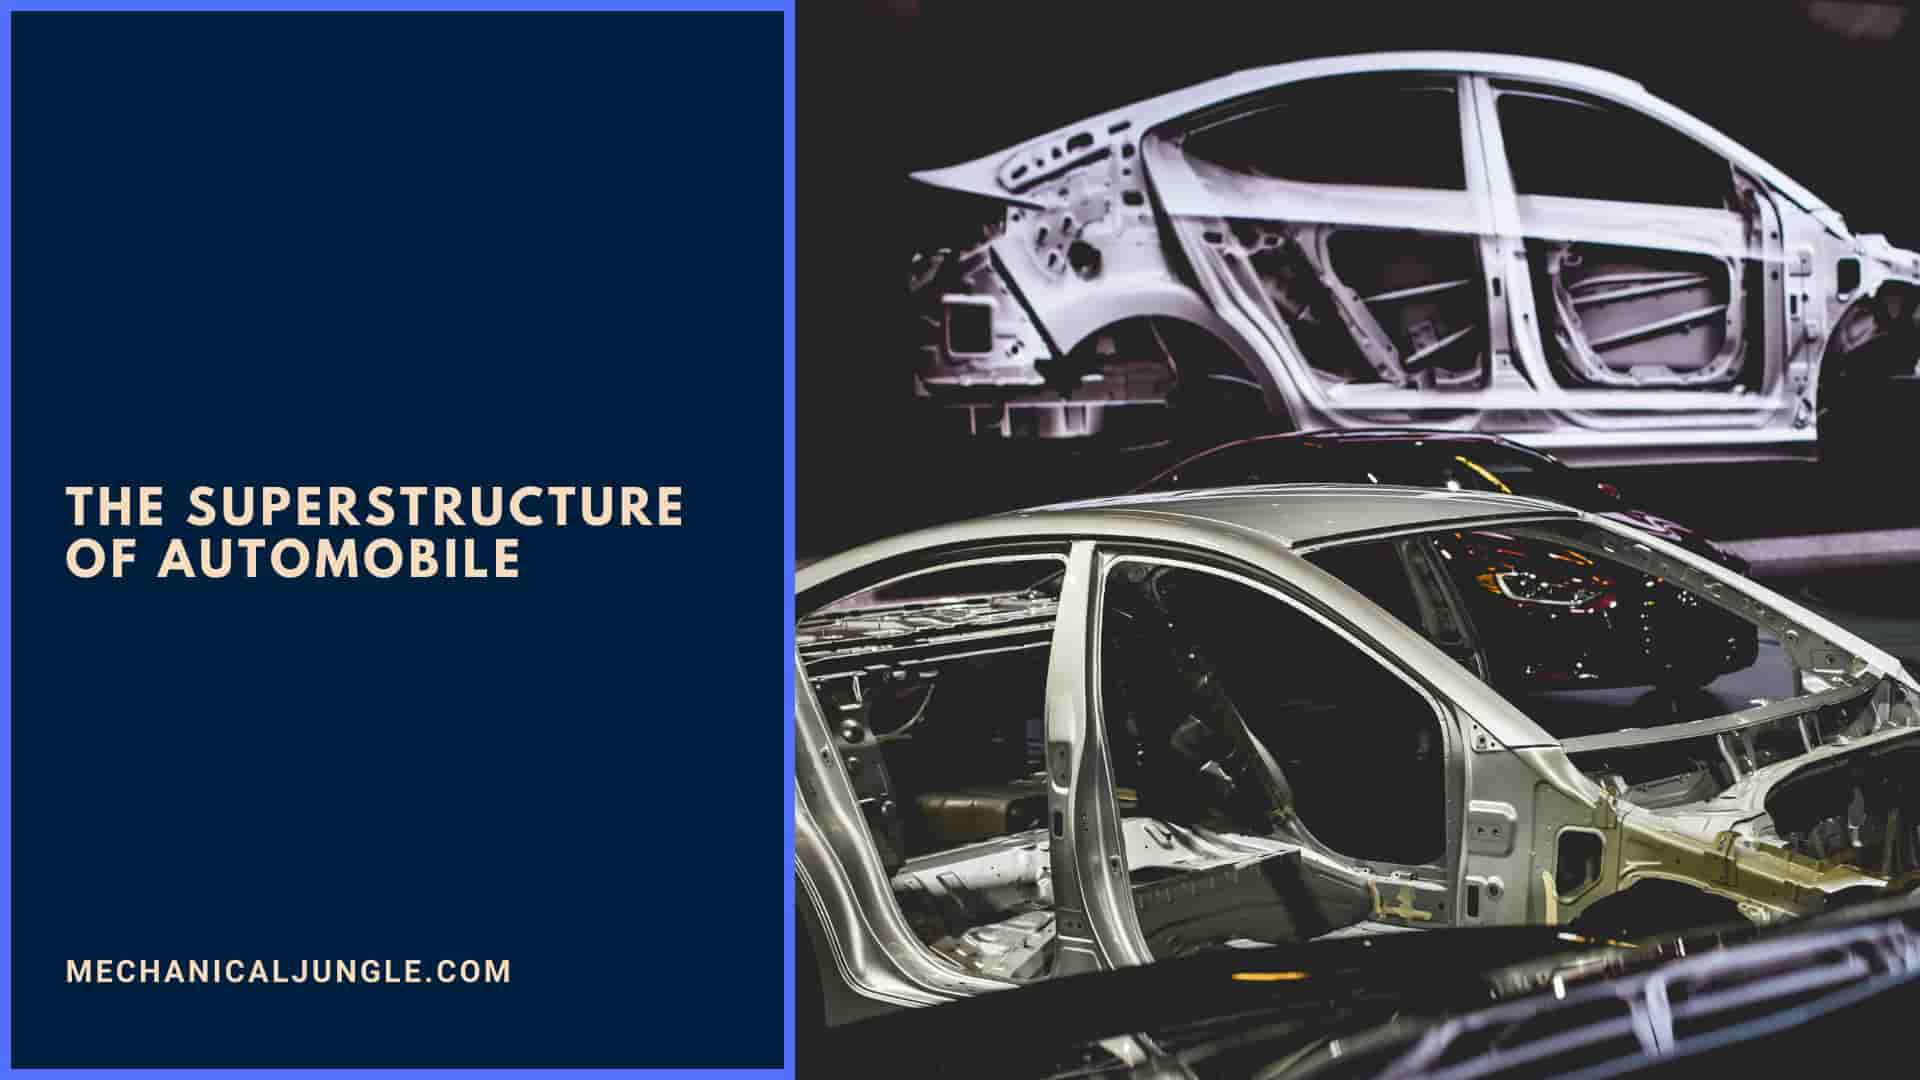 The Superstructure of Automobile